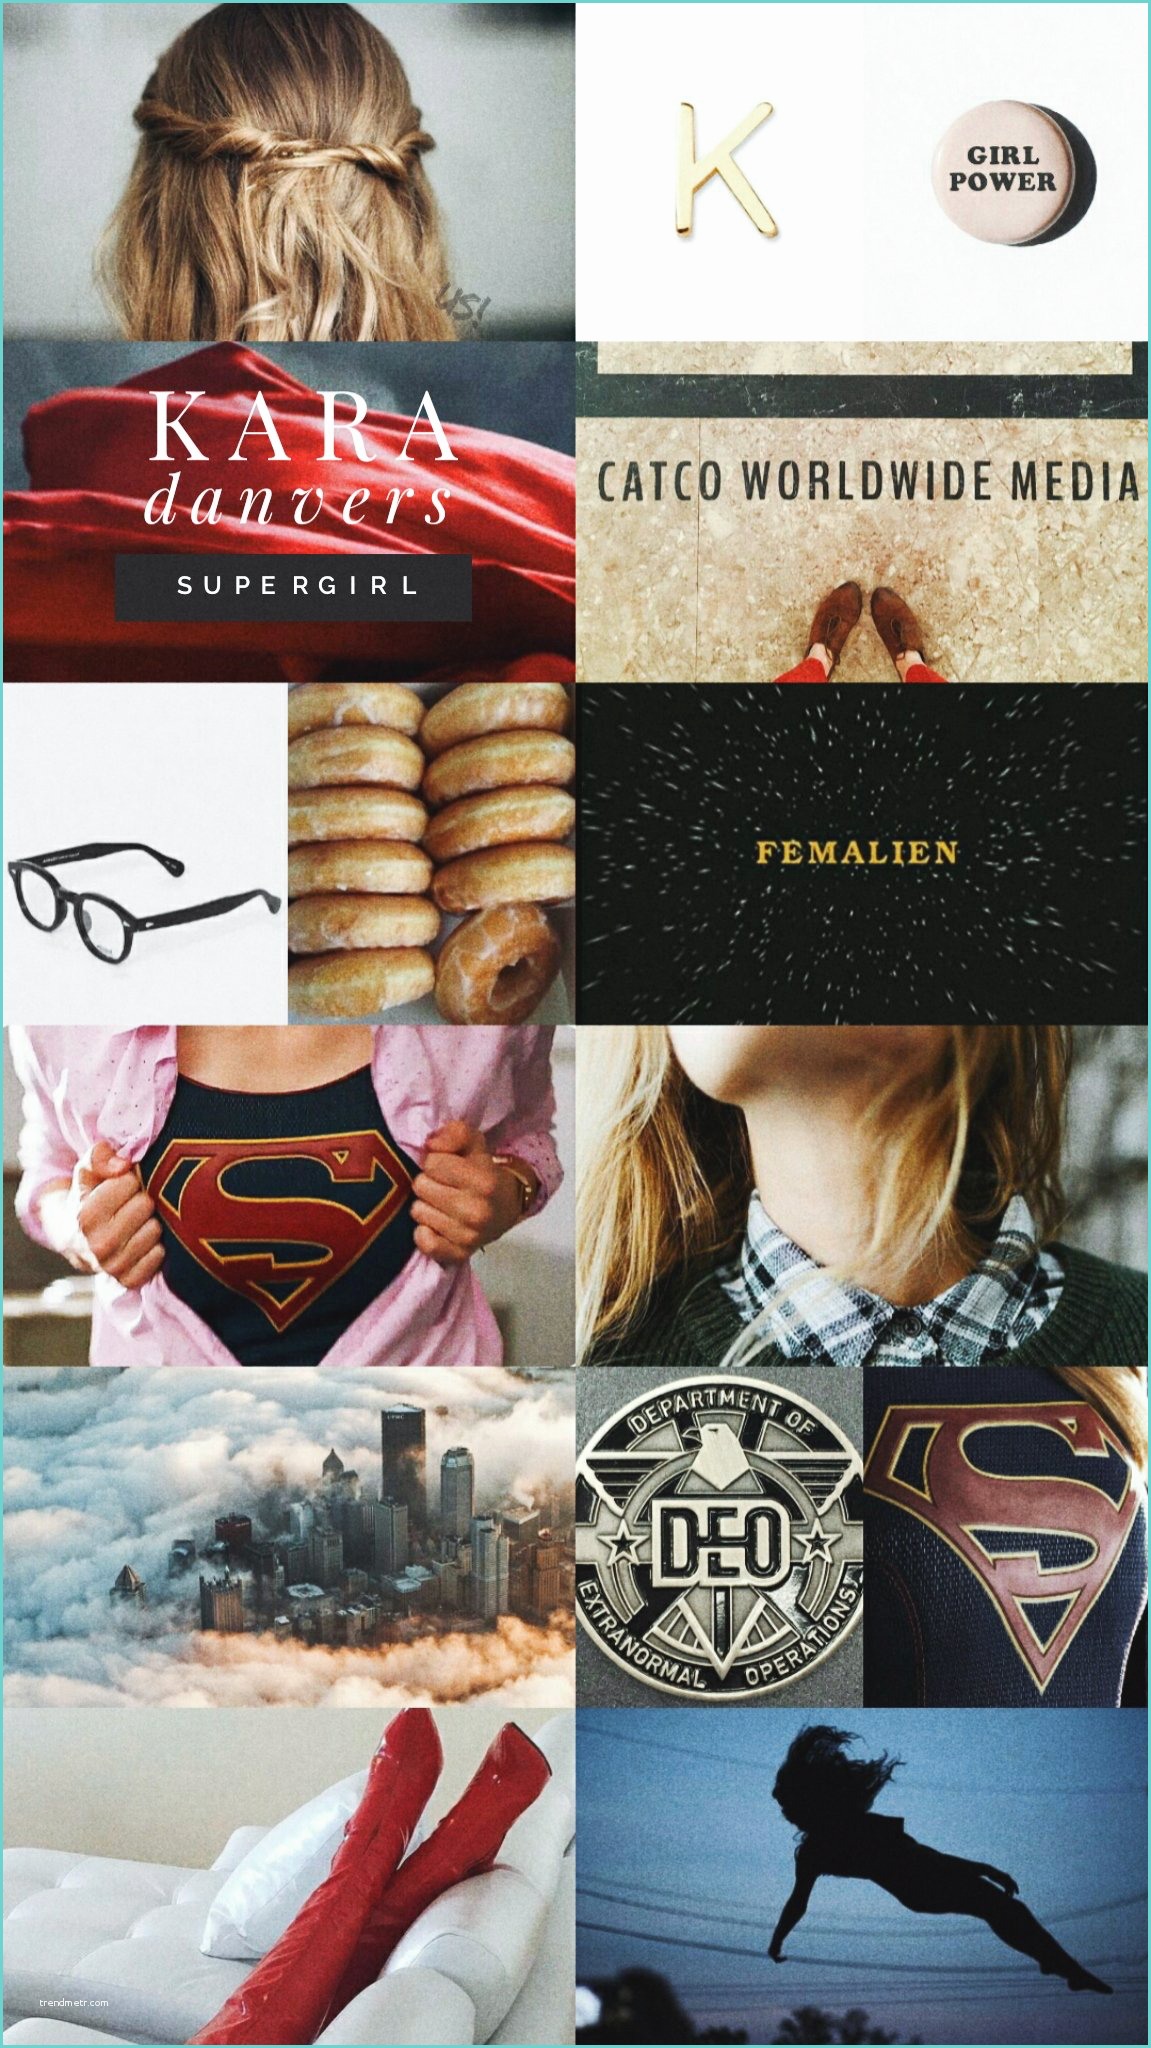 Allposters Return Policy Supergirl Aesthetic Supergirl Pinterest